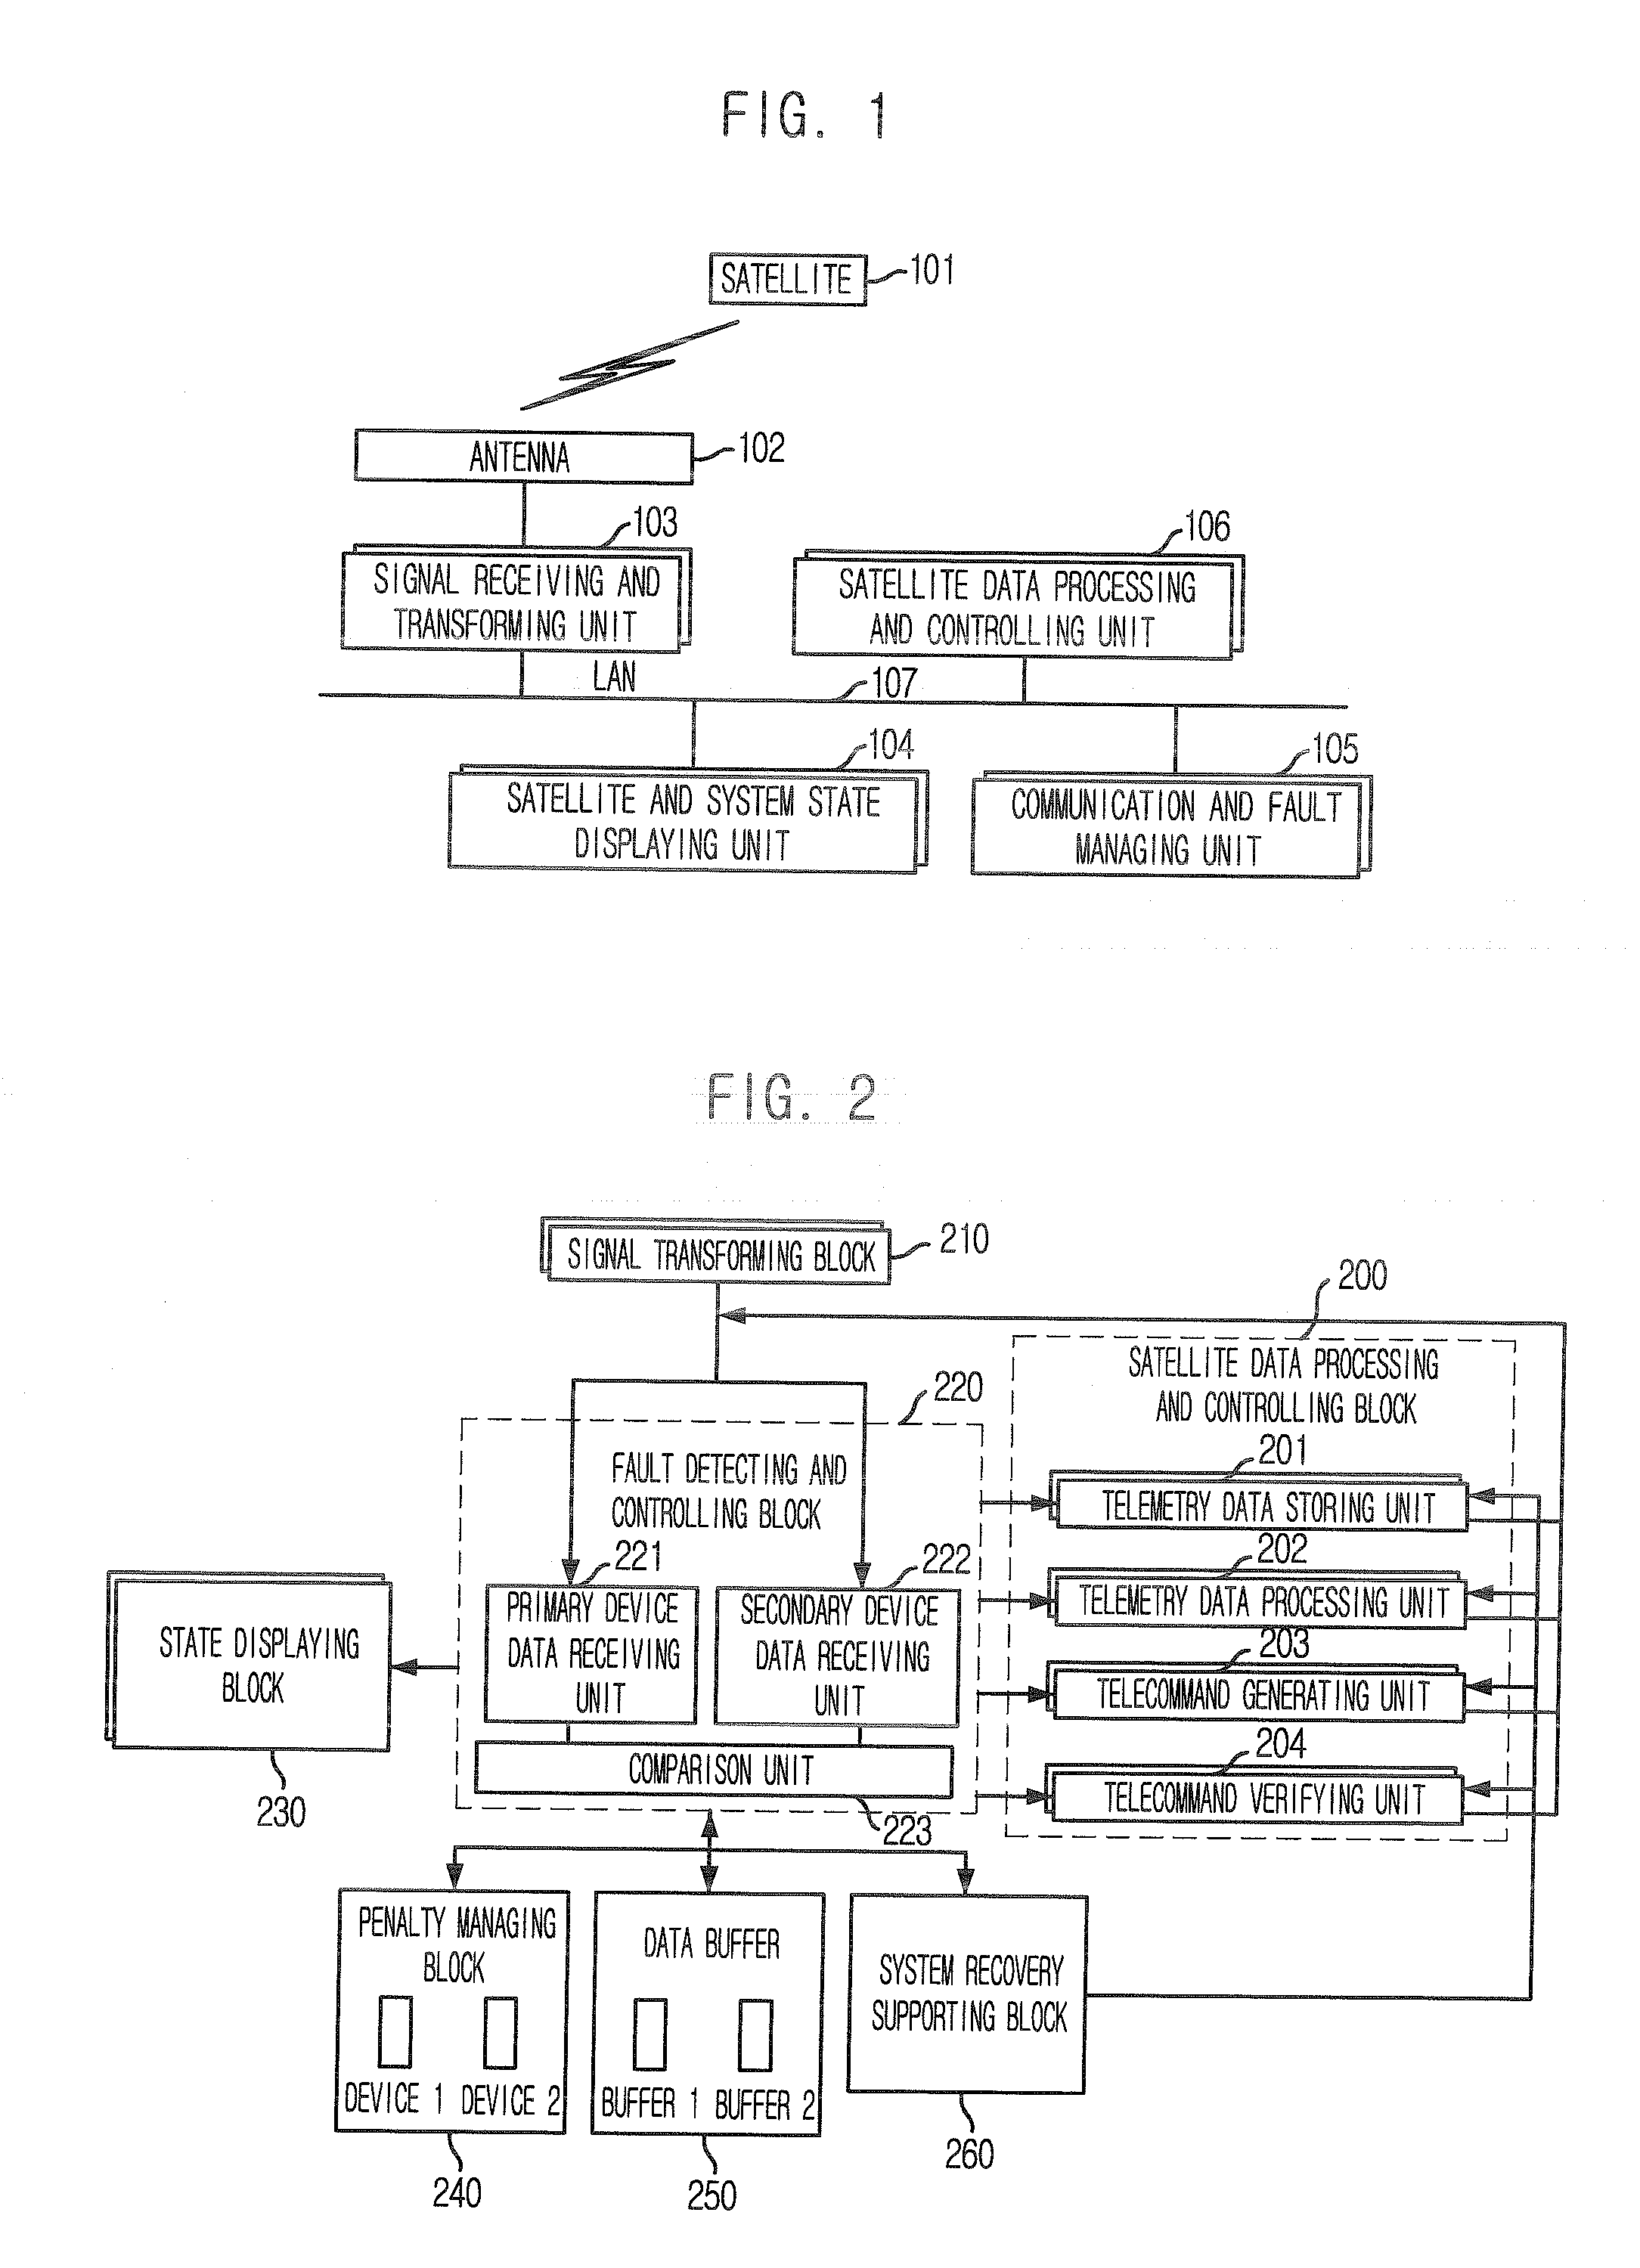 Apparatus and Method for Diagnosing Fault and Managing Data in Satellite Ground System